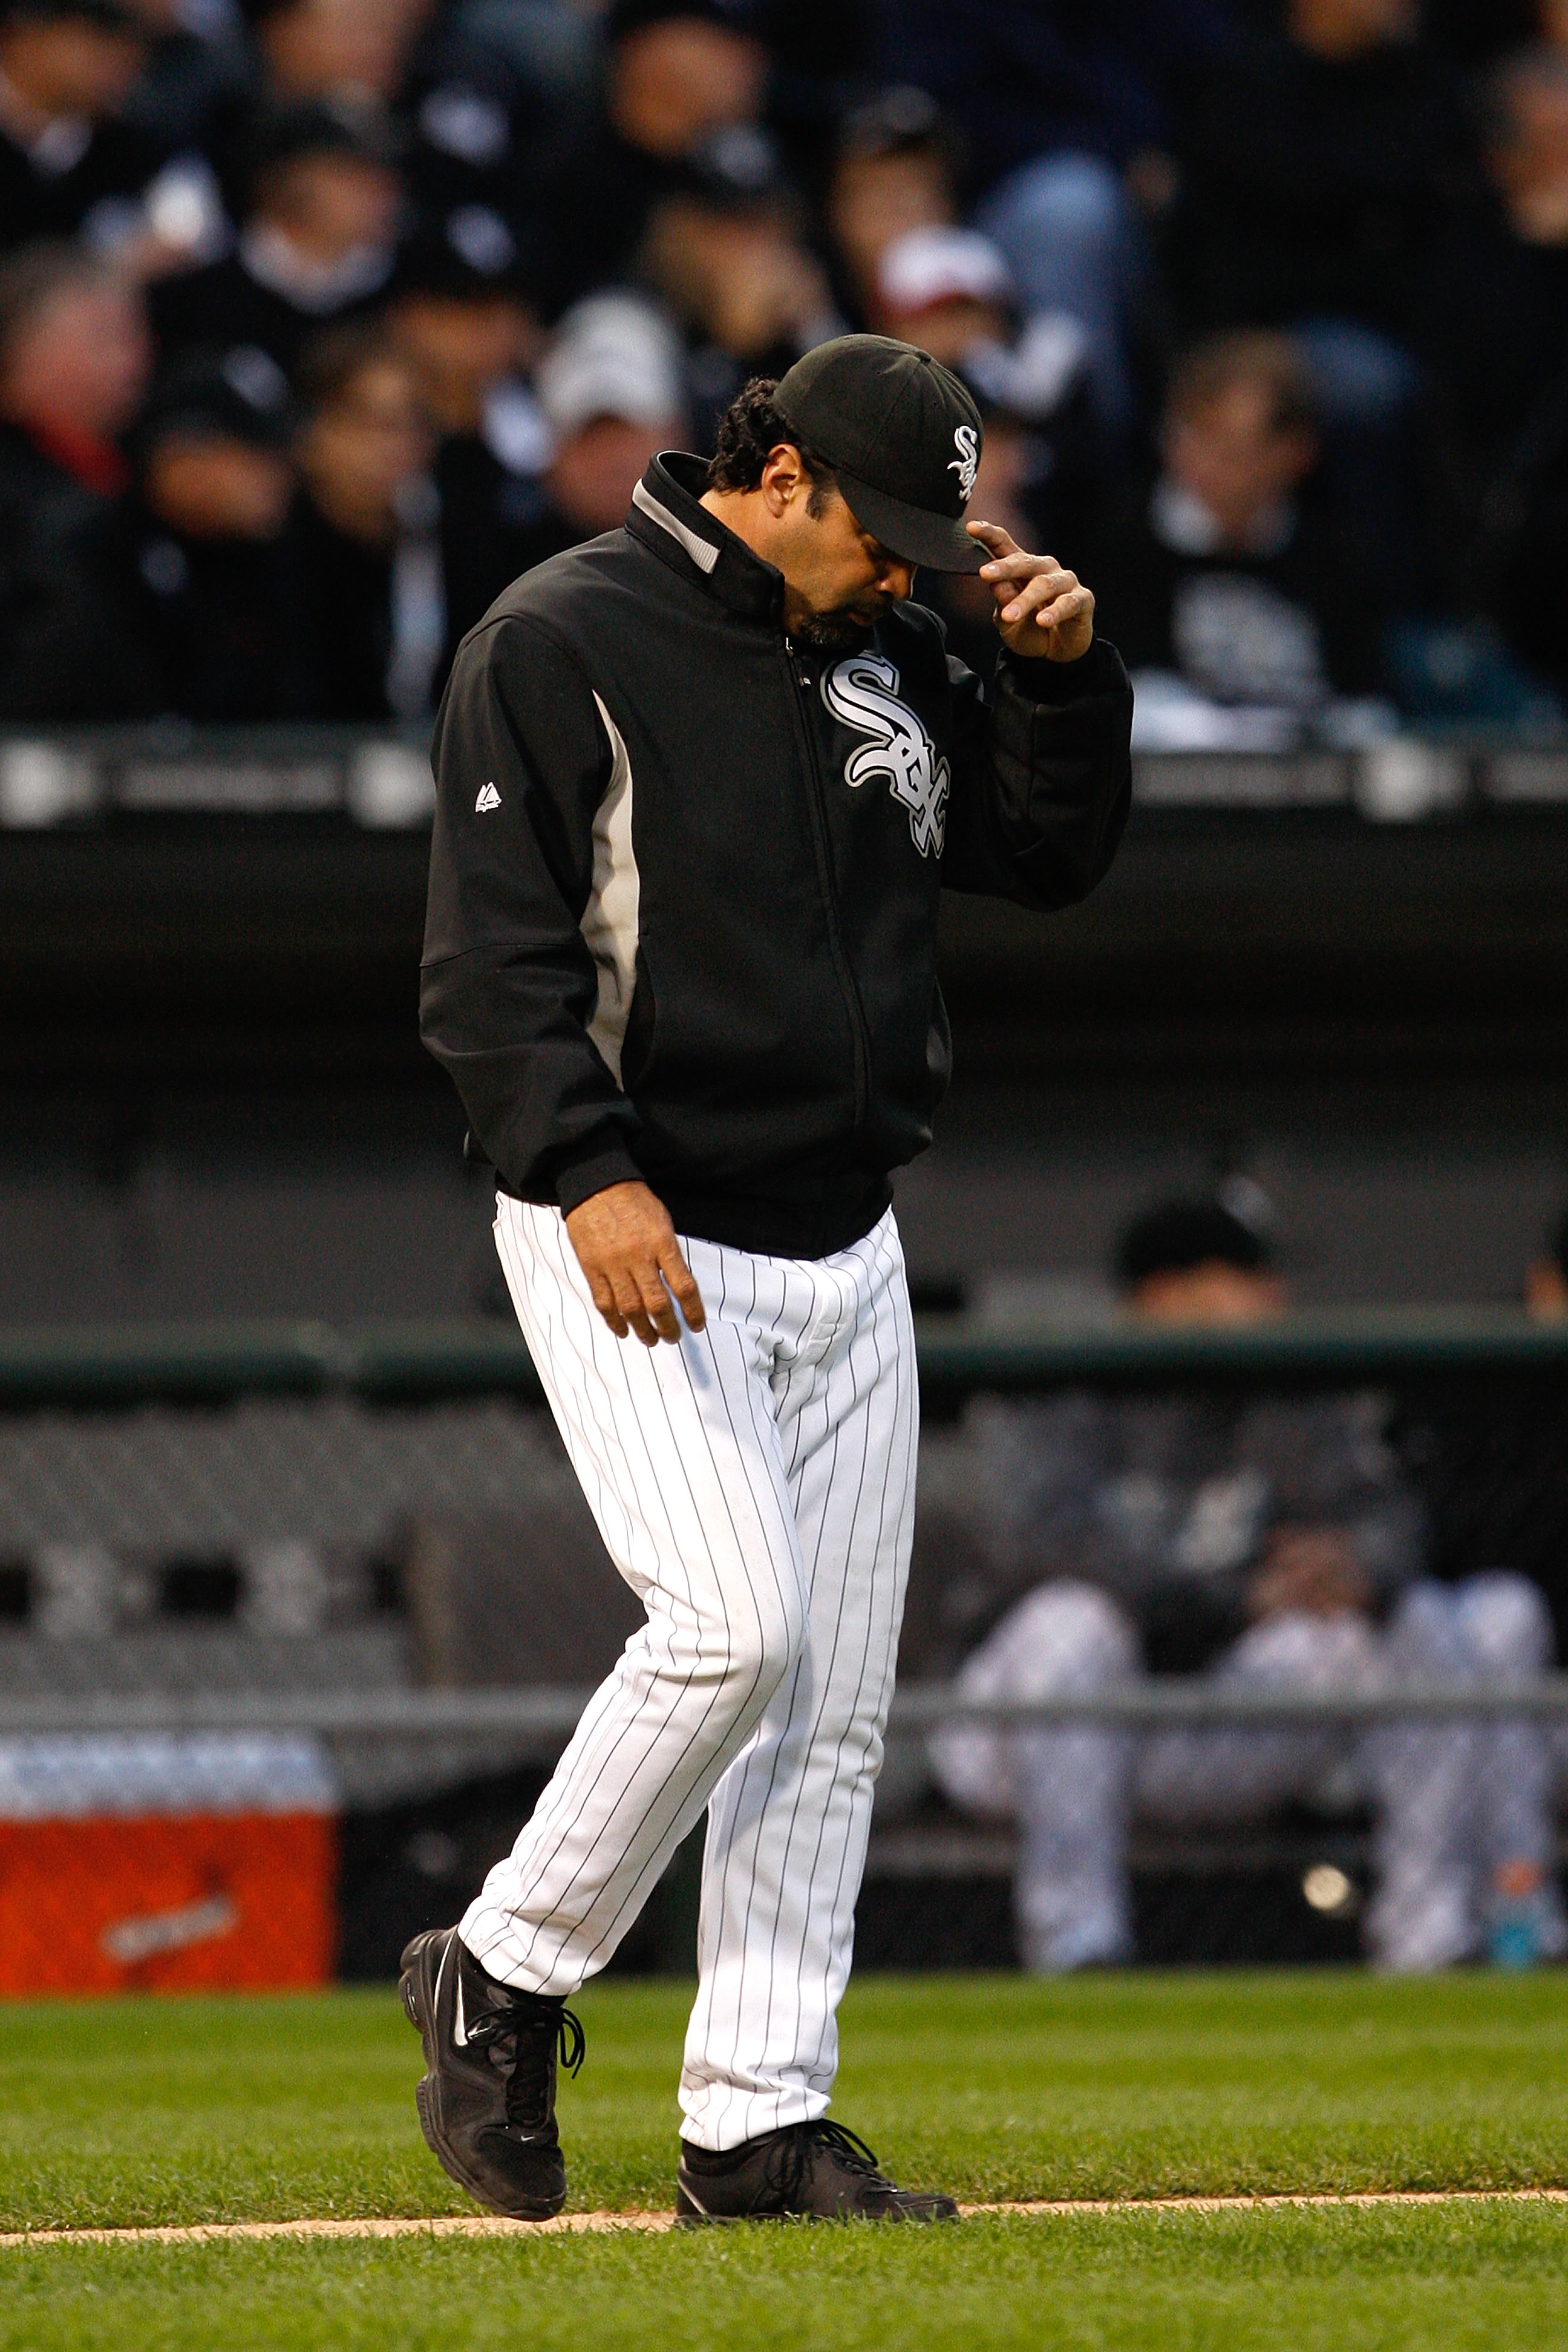 Padres right to interview Ozzie Guillen, despite baggage - The San